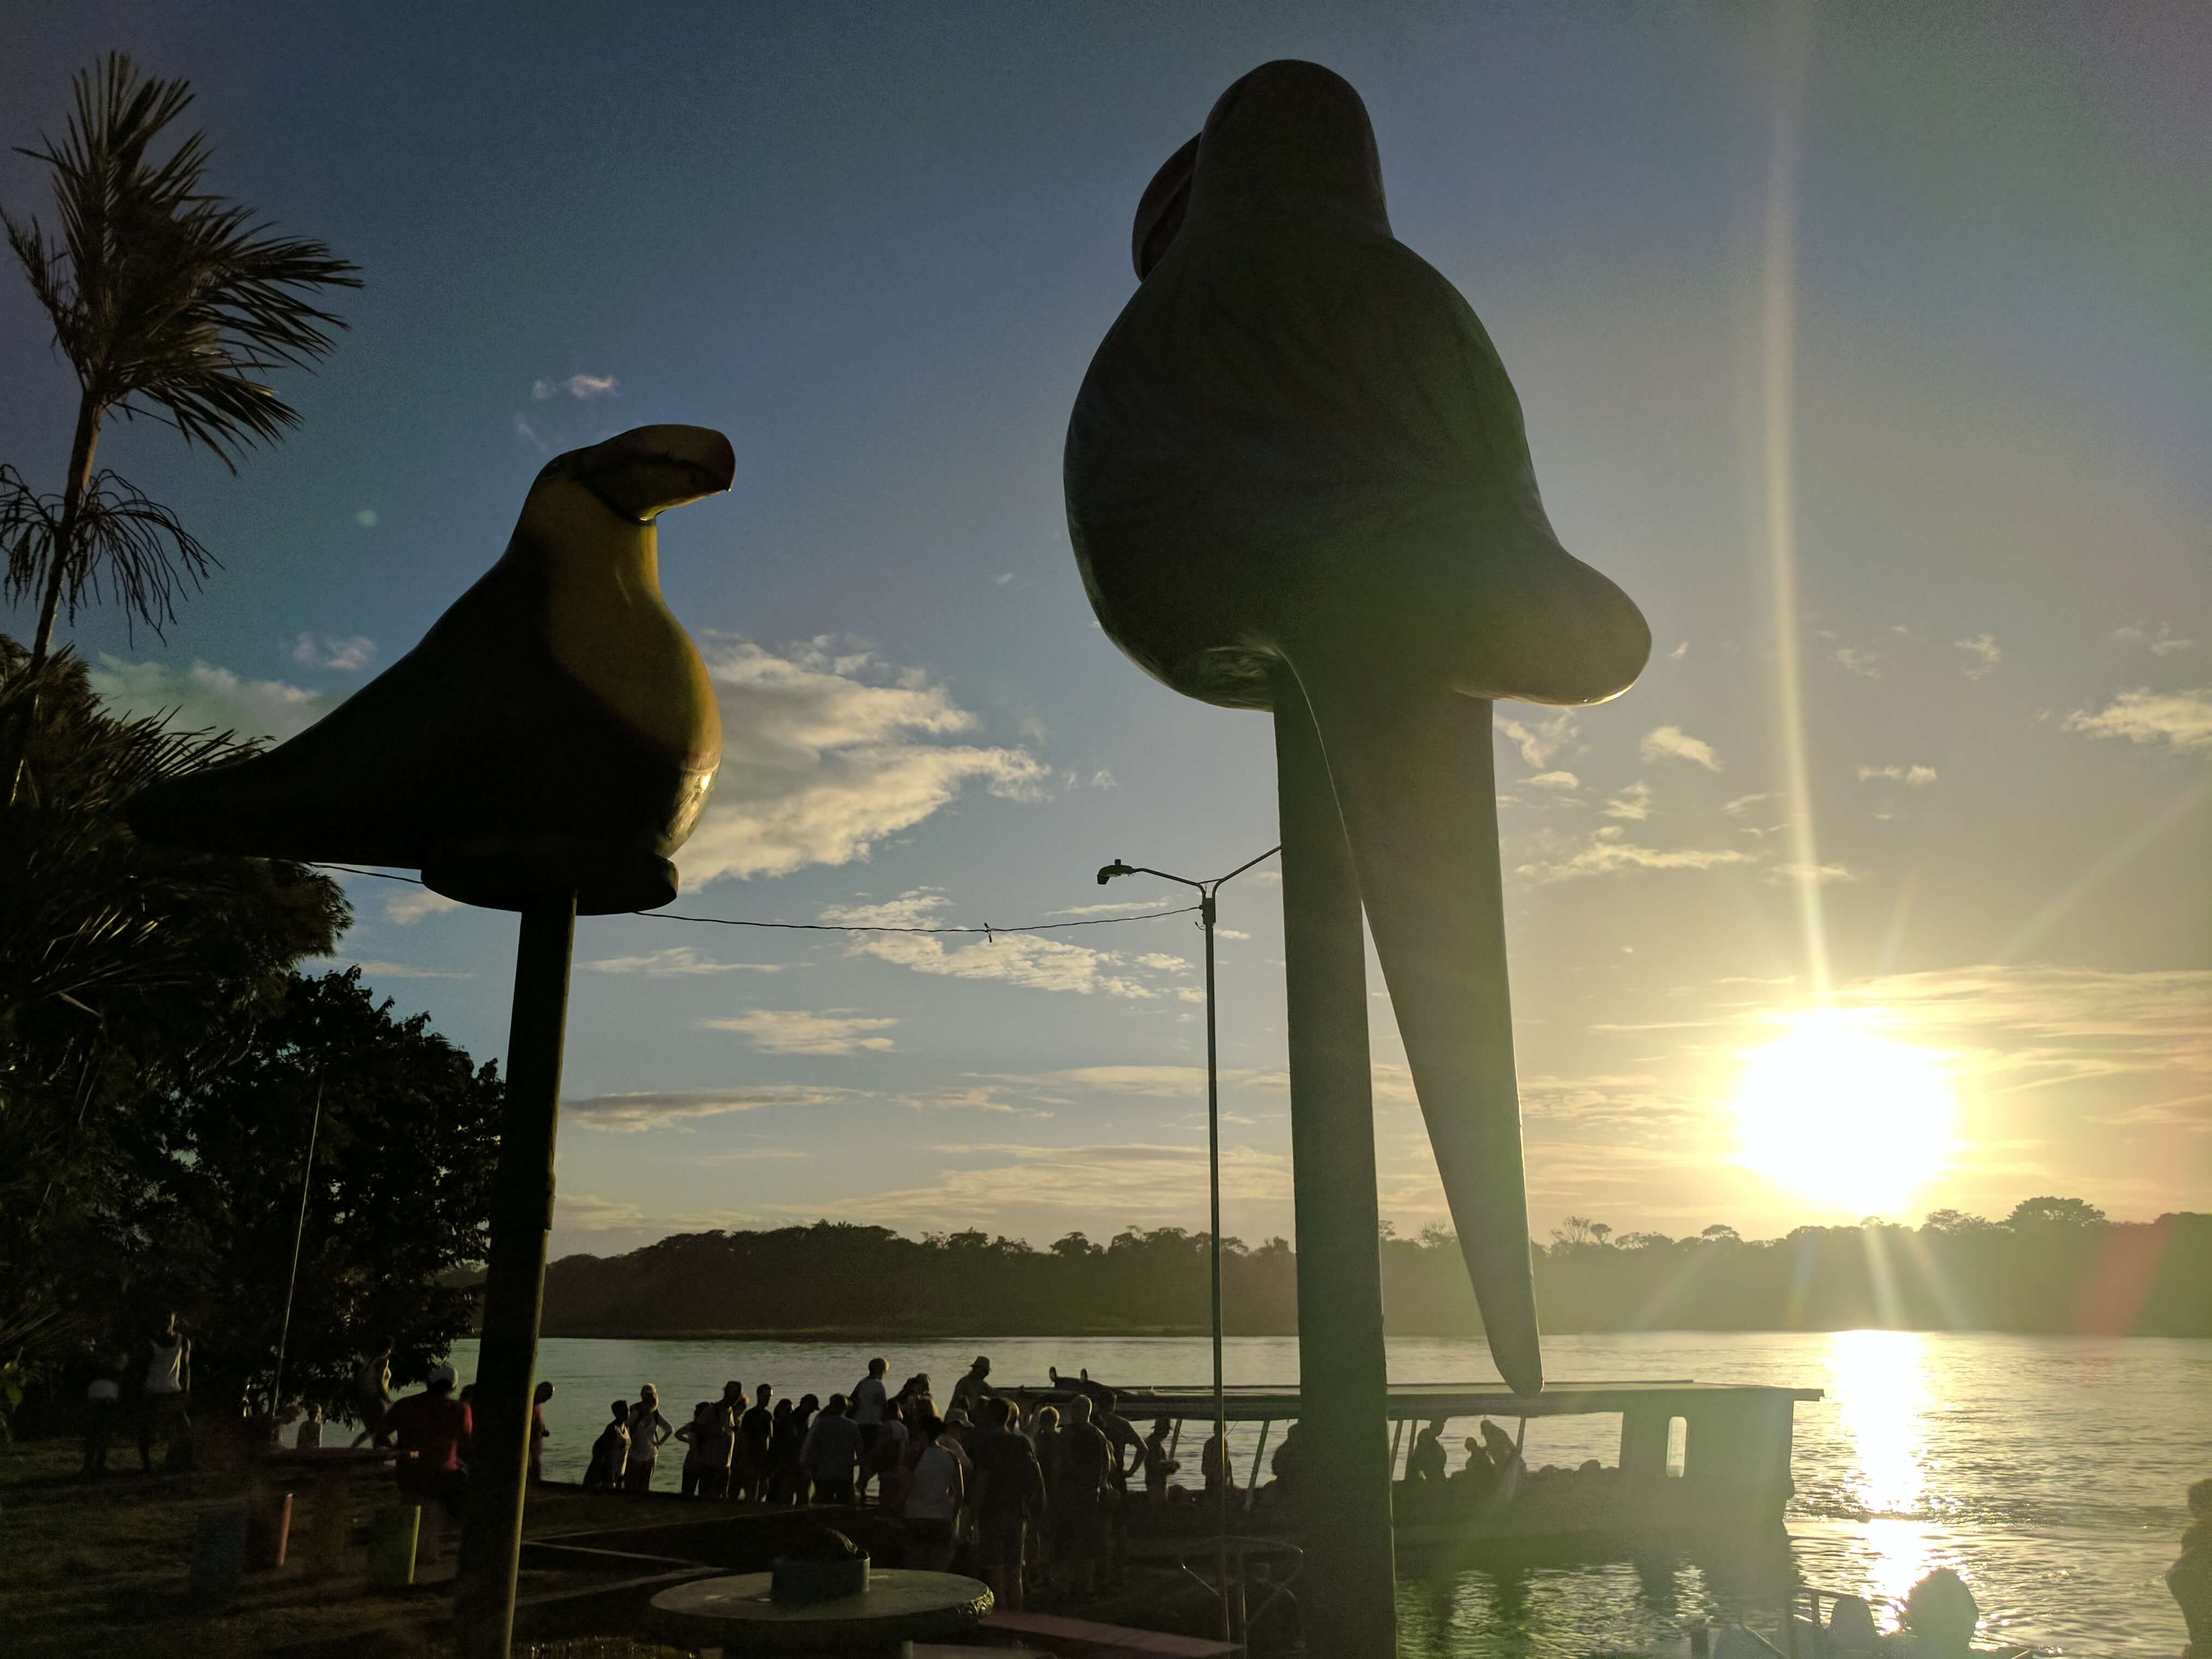 Costa Rica Itinerary - the sun setting on Tortugero village through the large statutes of tropical birds